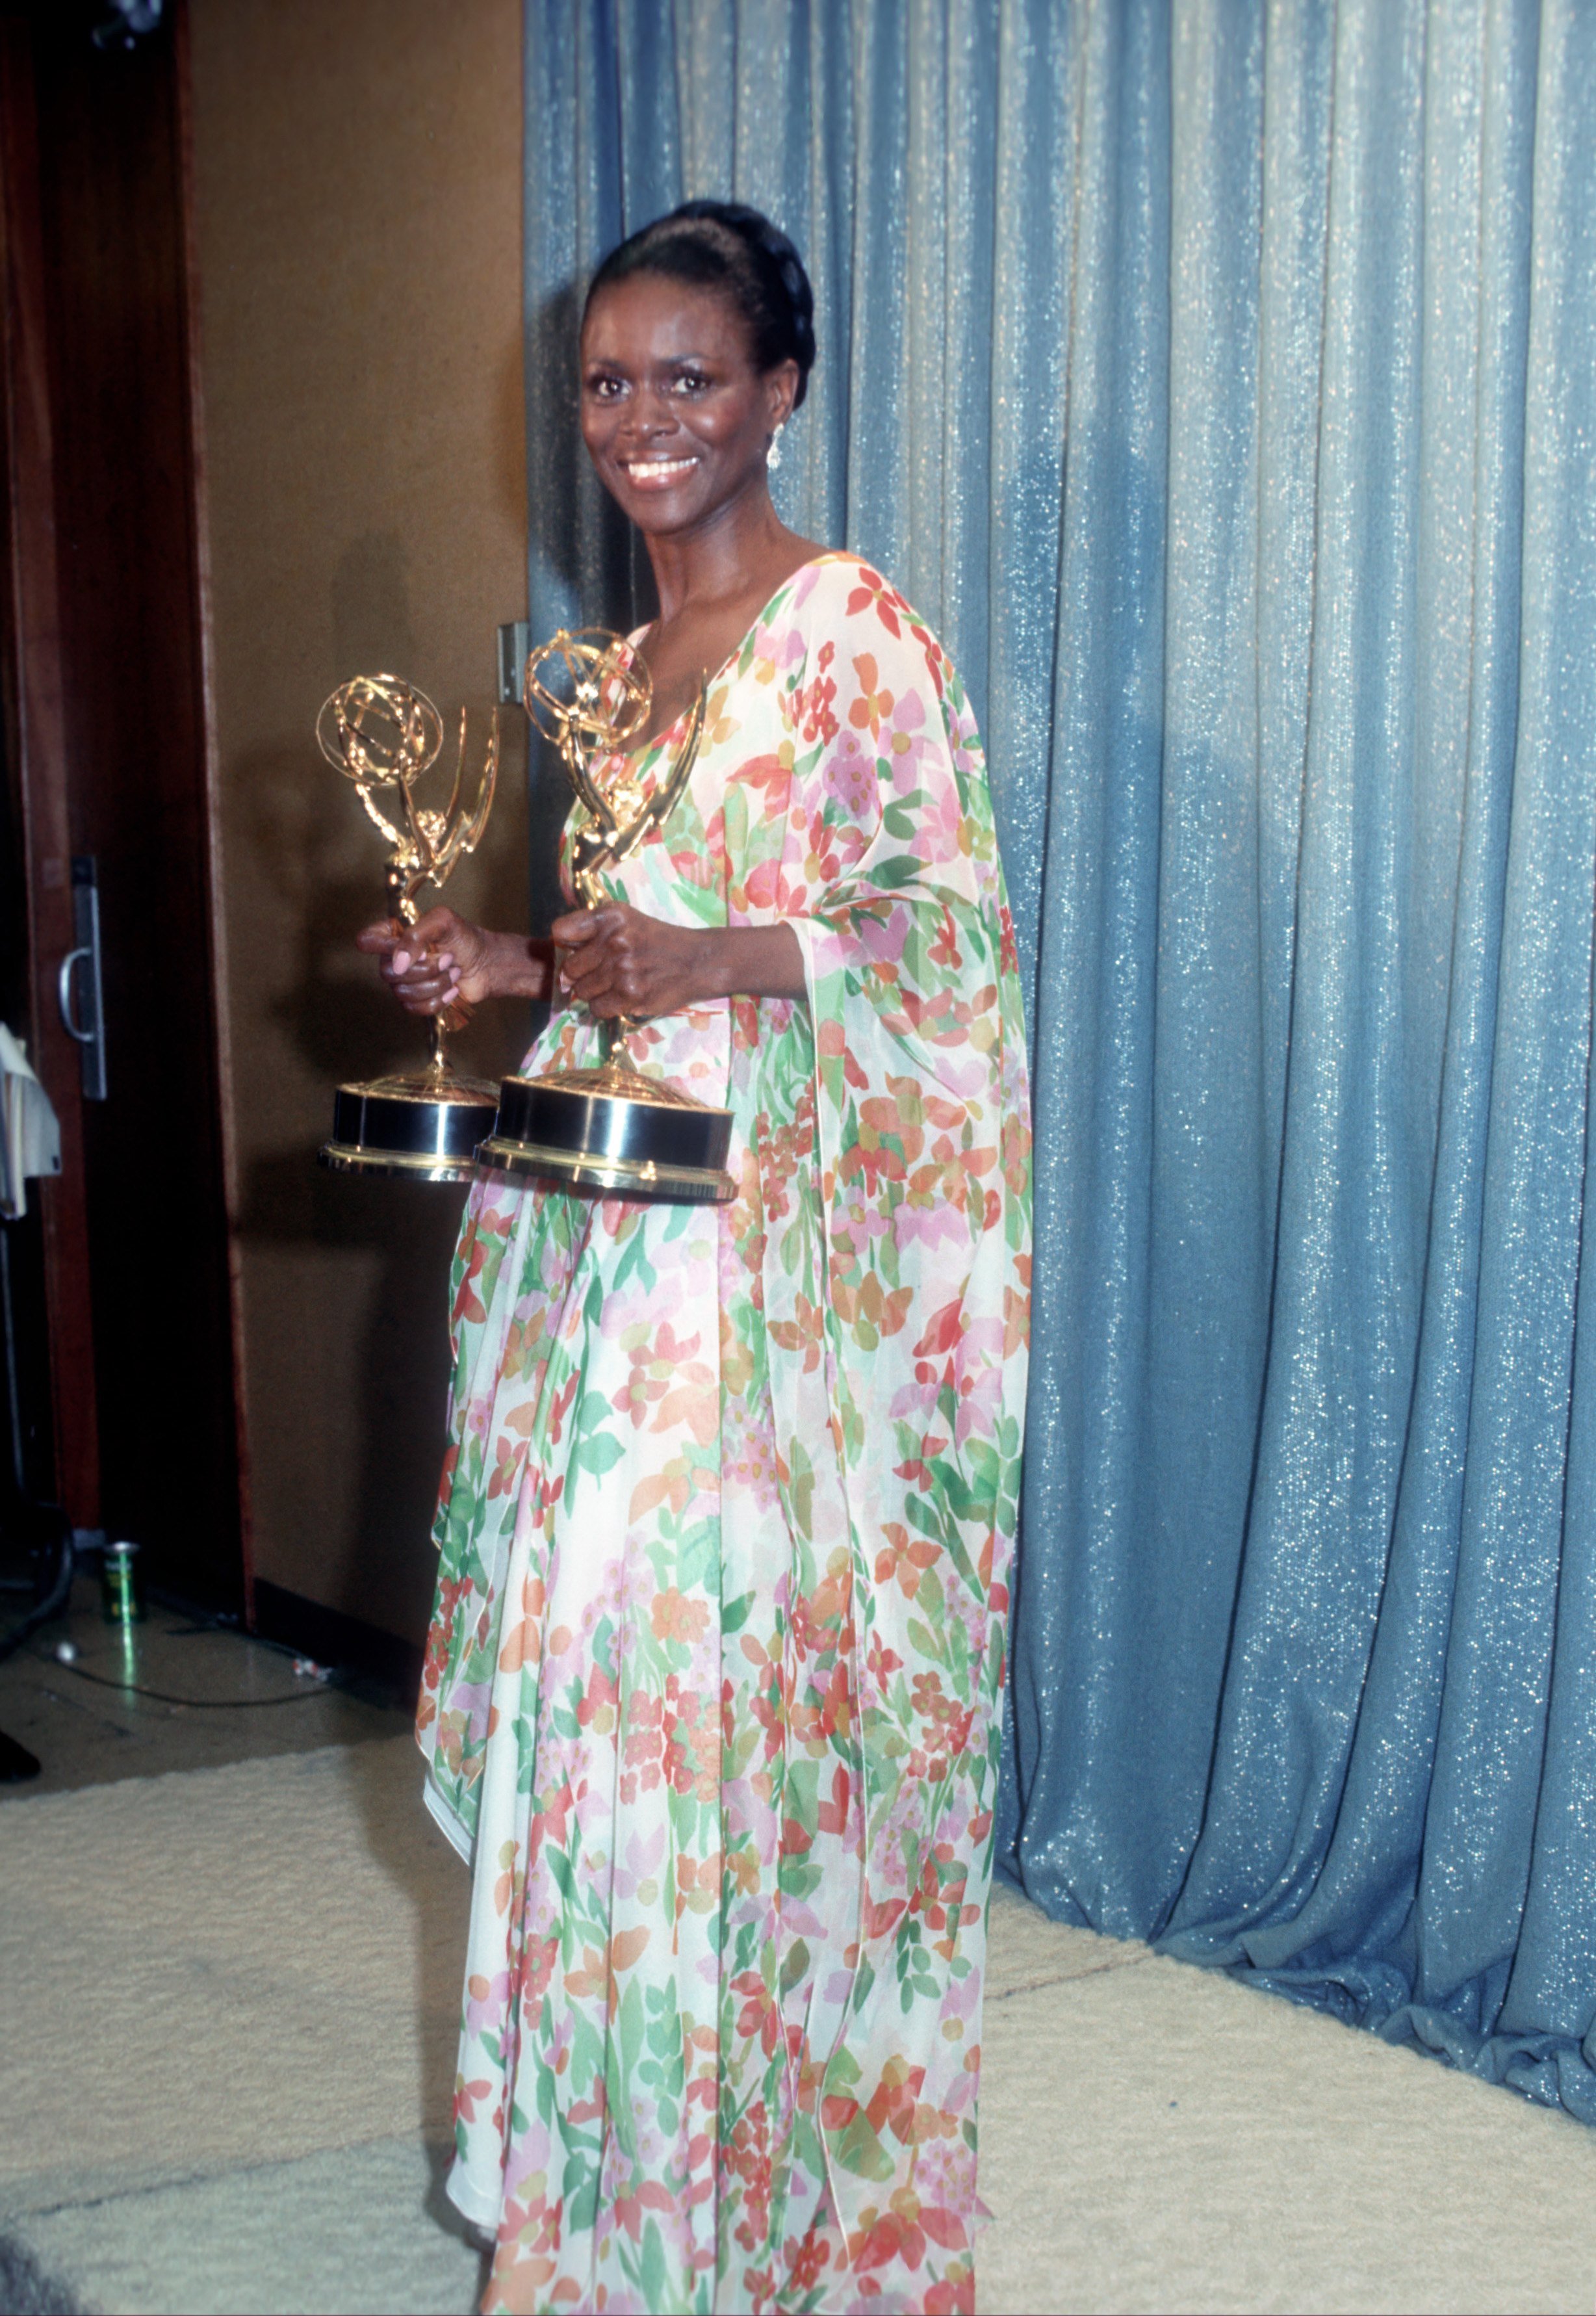 Cicely Tyson holds the two Emmy Awards that she won for her performance in "The Autobiography Of Miss Jane Pittman" on May 28, 1974 in Los Angeles, California. | Source: Getty Images